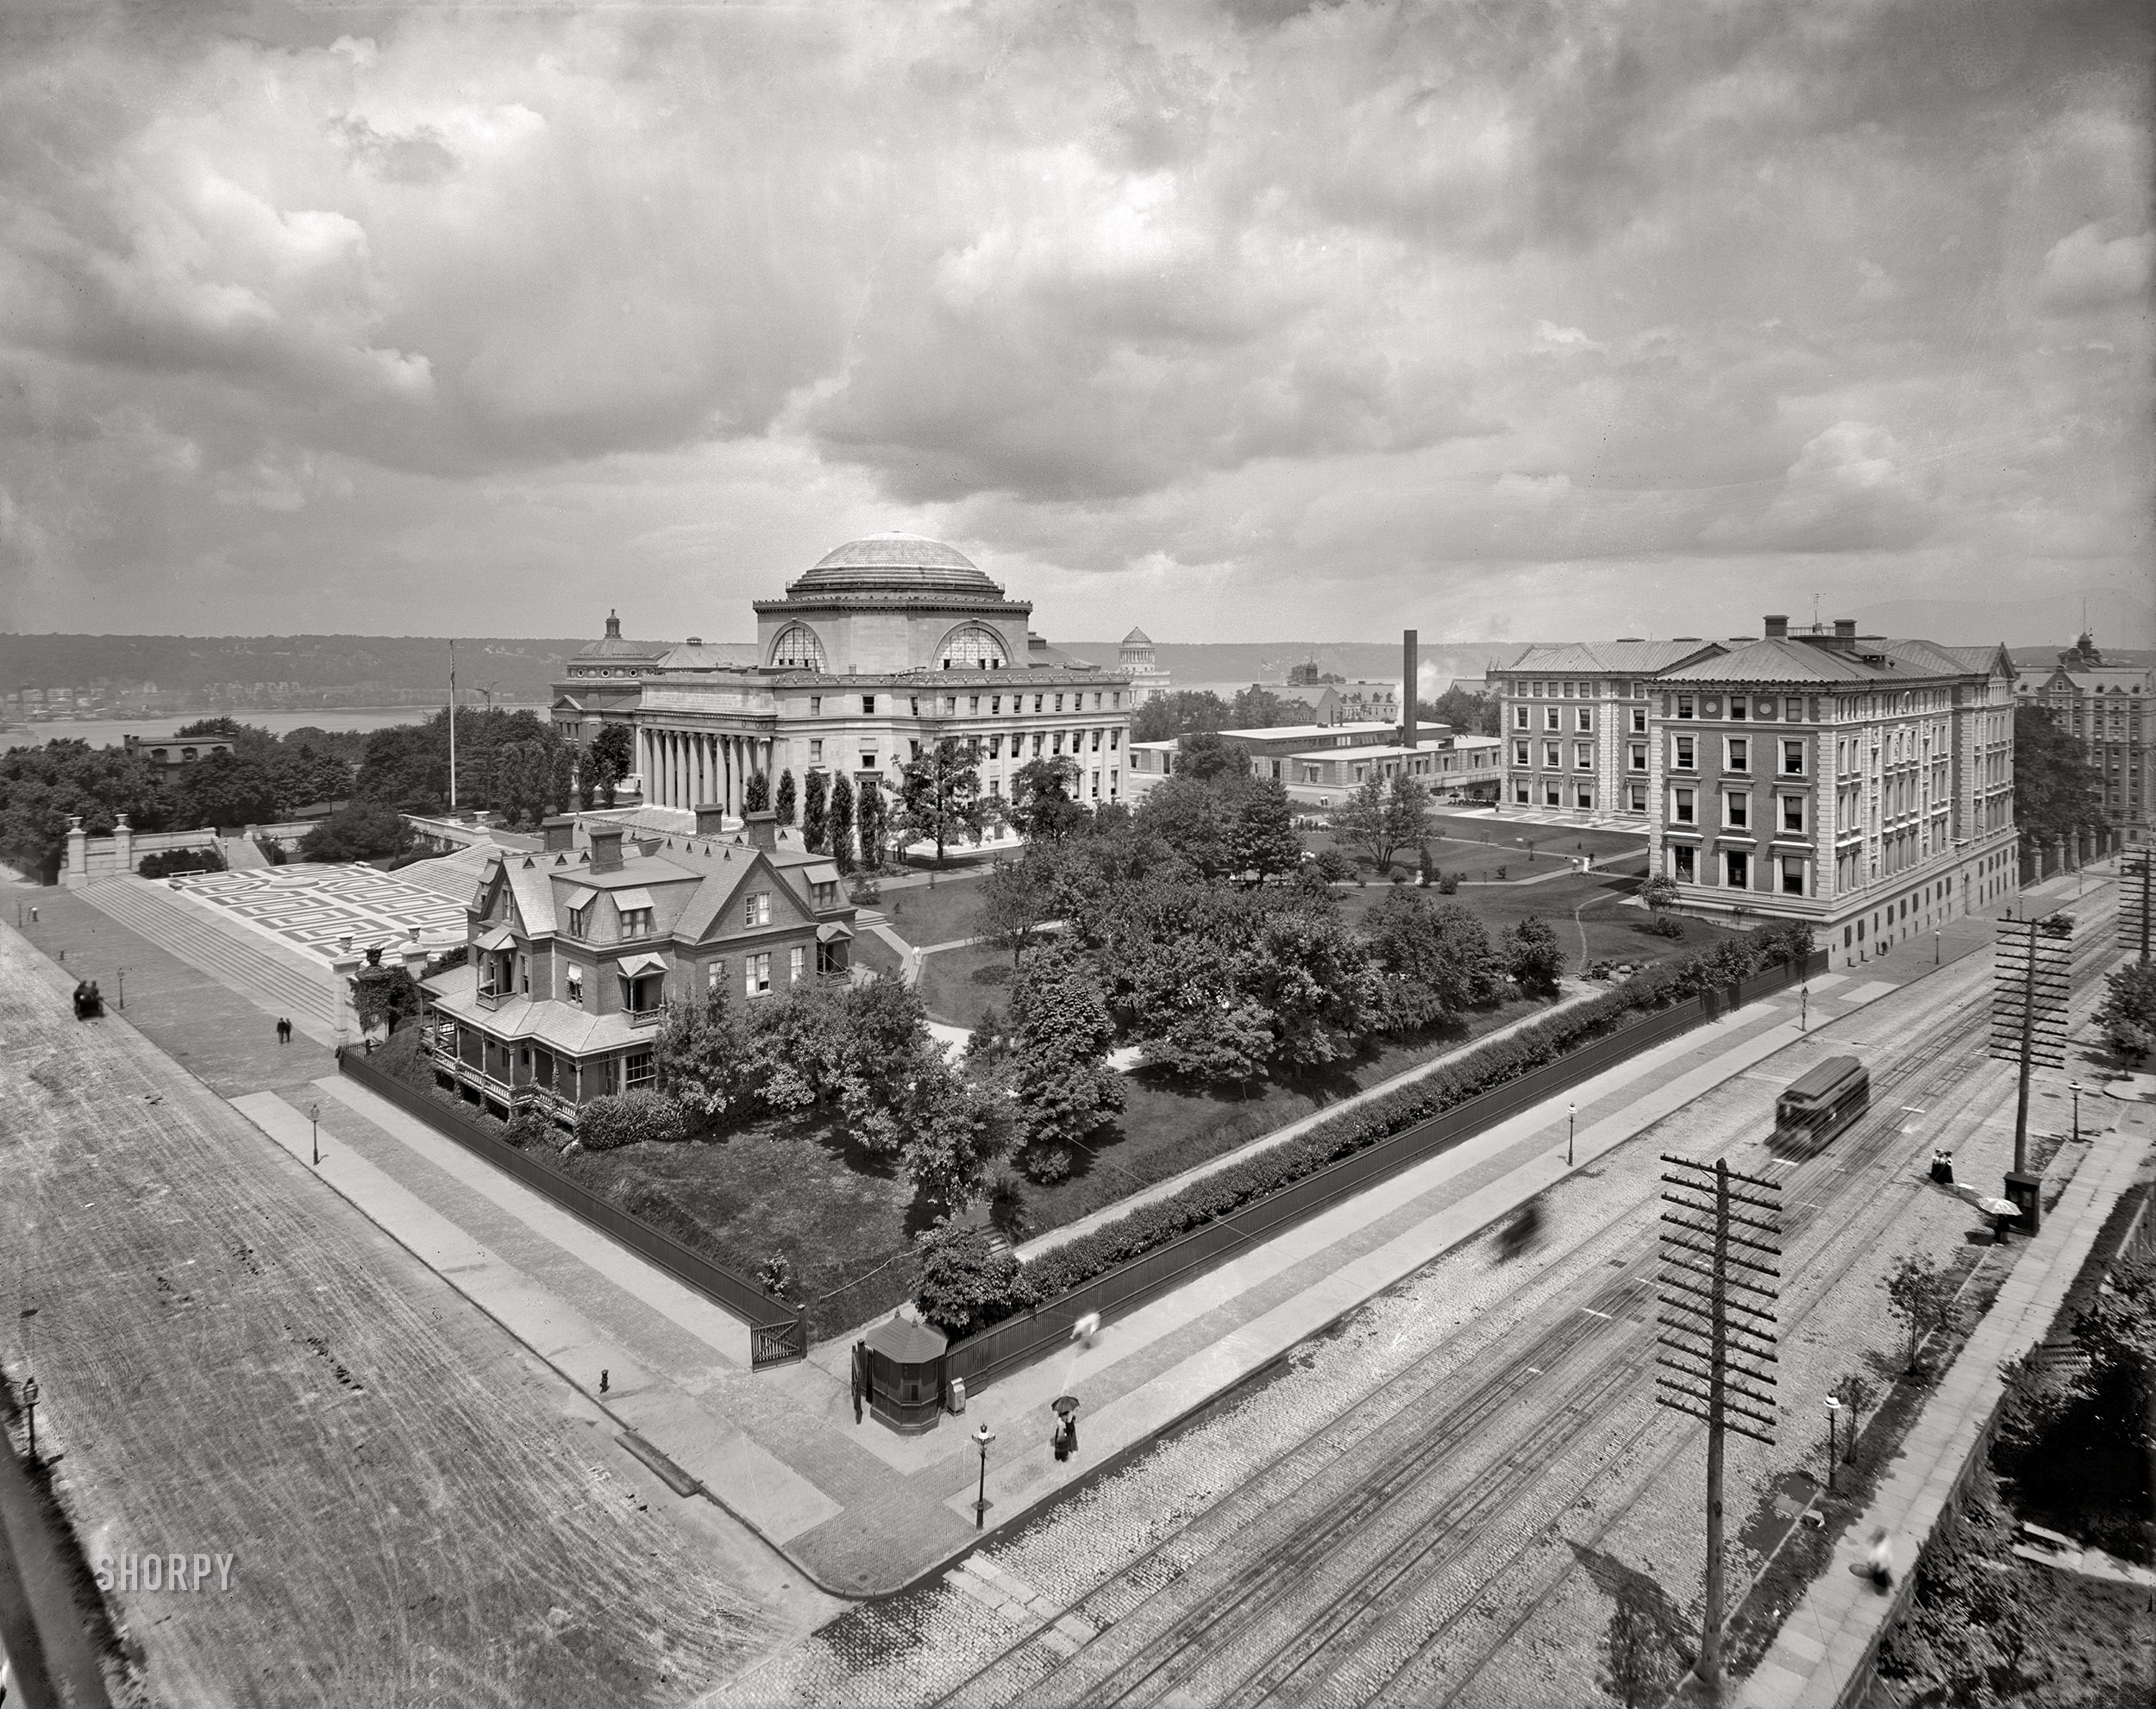 New York, 1903. "Columbia University and the Hudson River." 8x10 inch dry plate glass negative, Detroit Photographic Company. View full size.